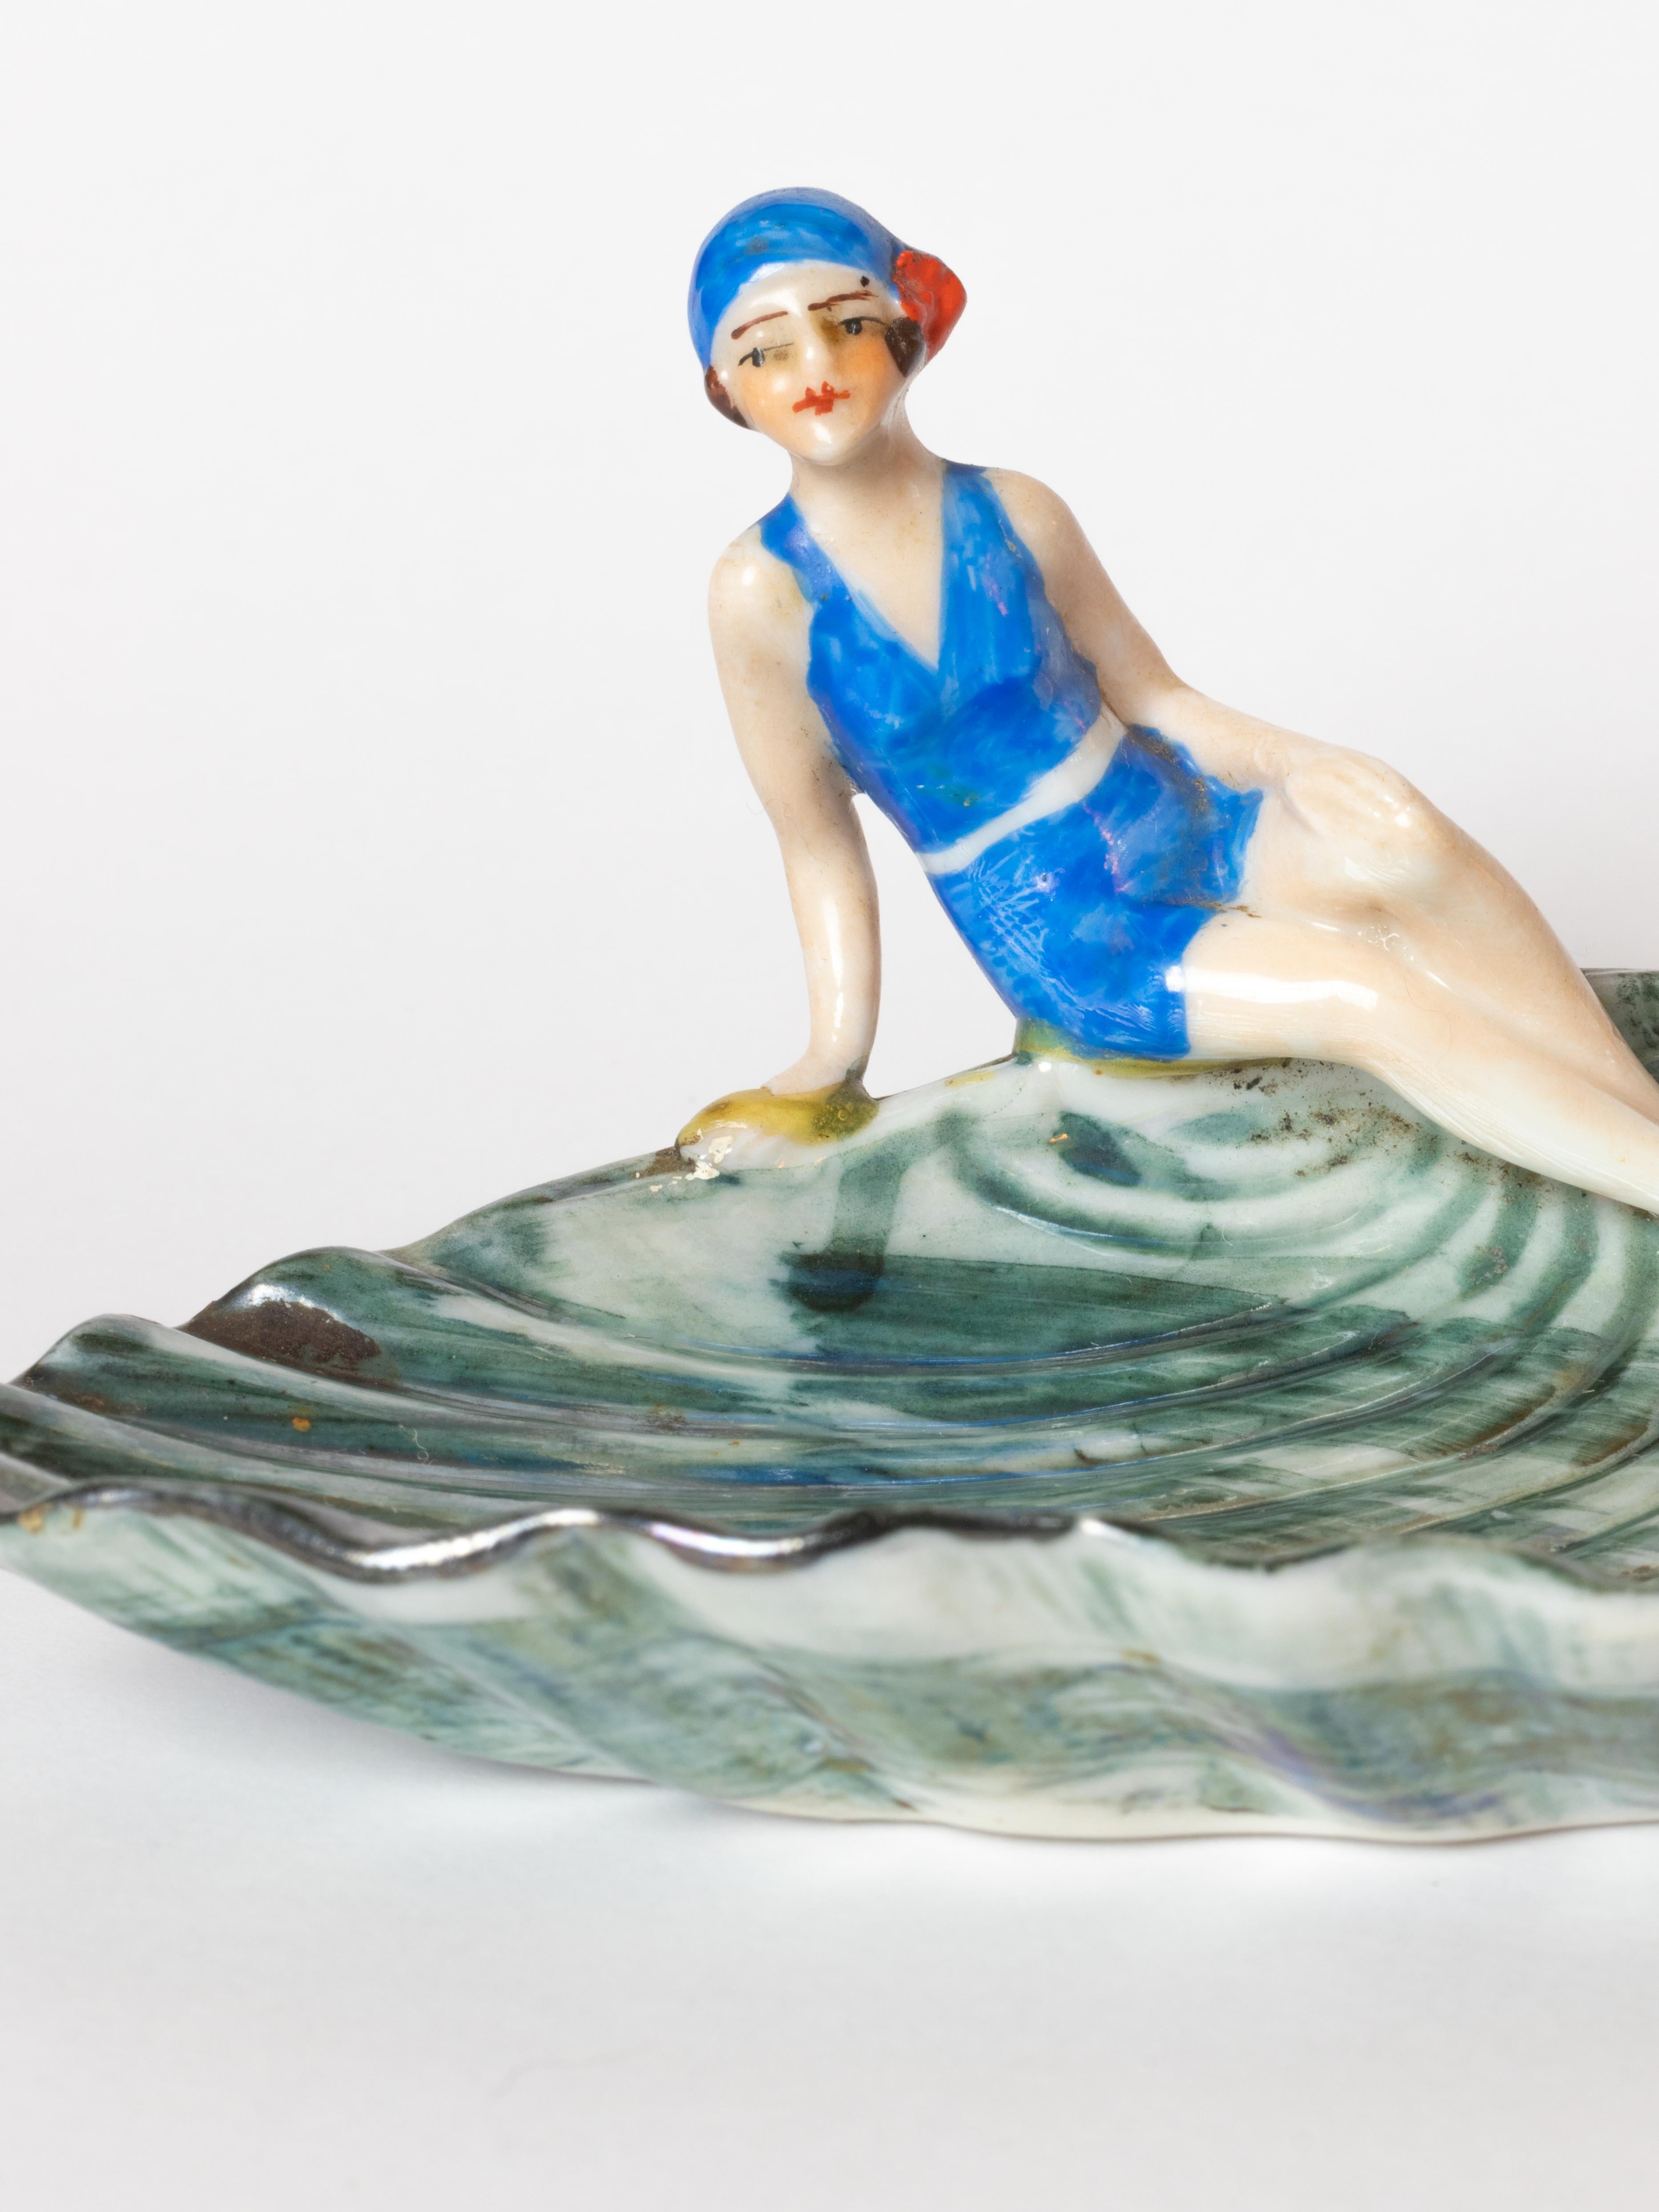 20th Century Art Deco Goebel Pin Up Woman Porcelain by Goebel, 1929 For Sale